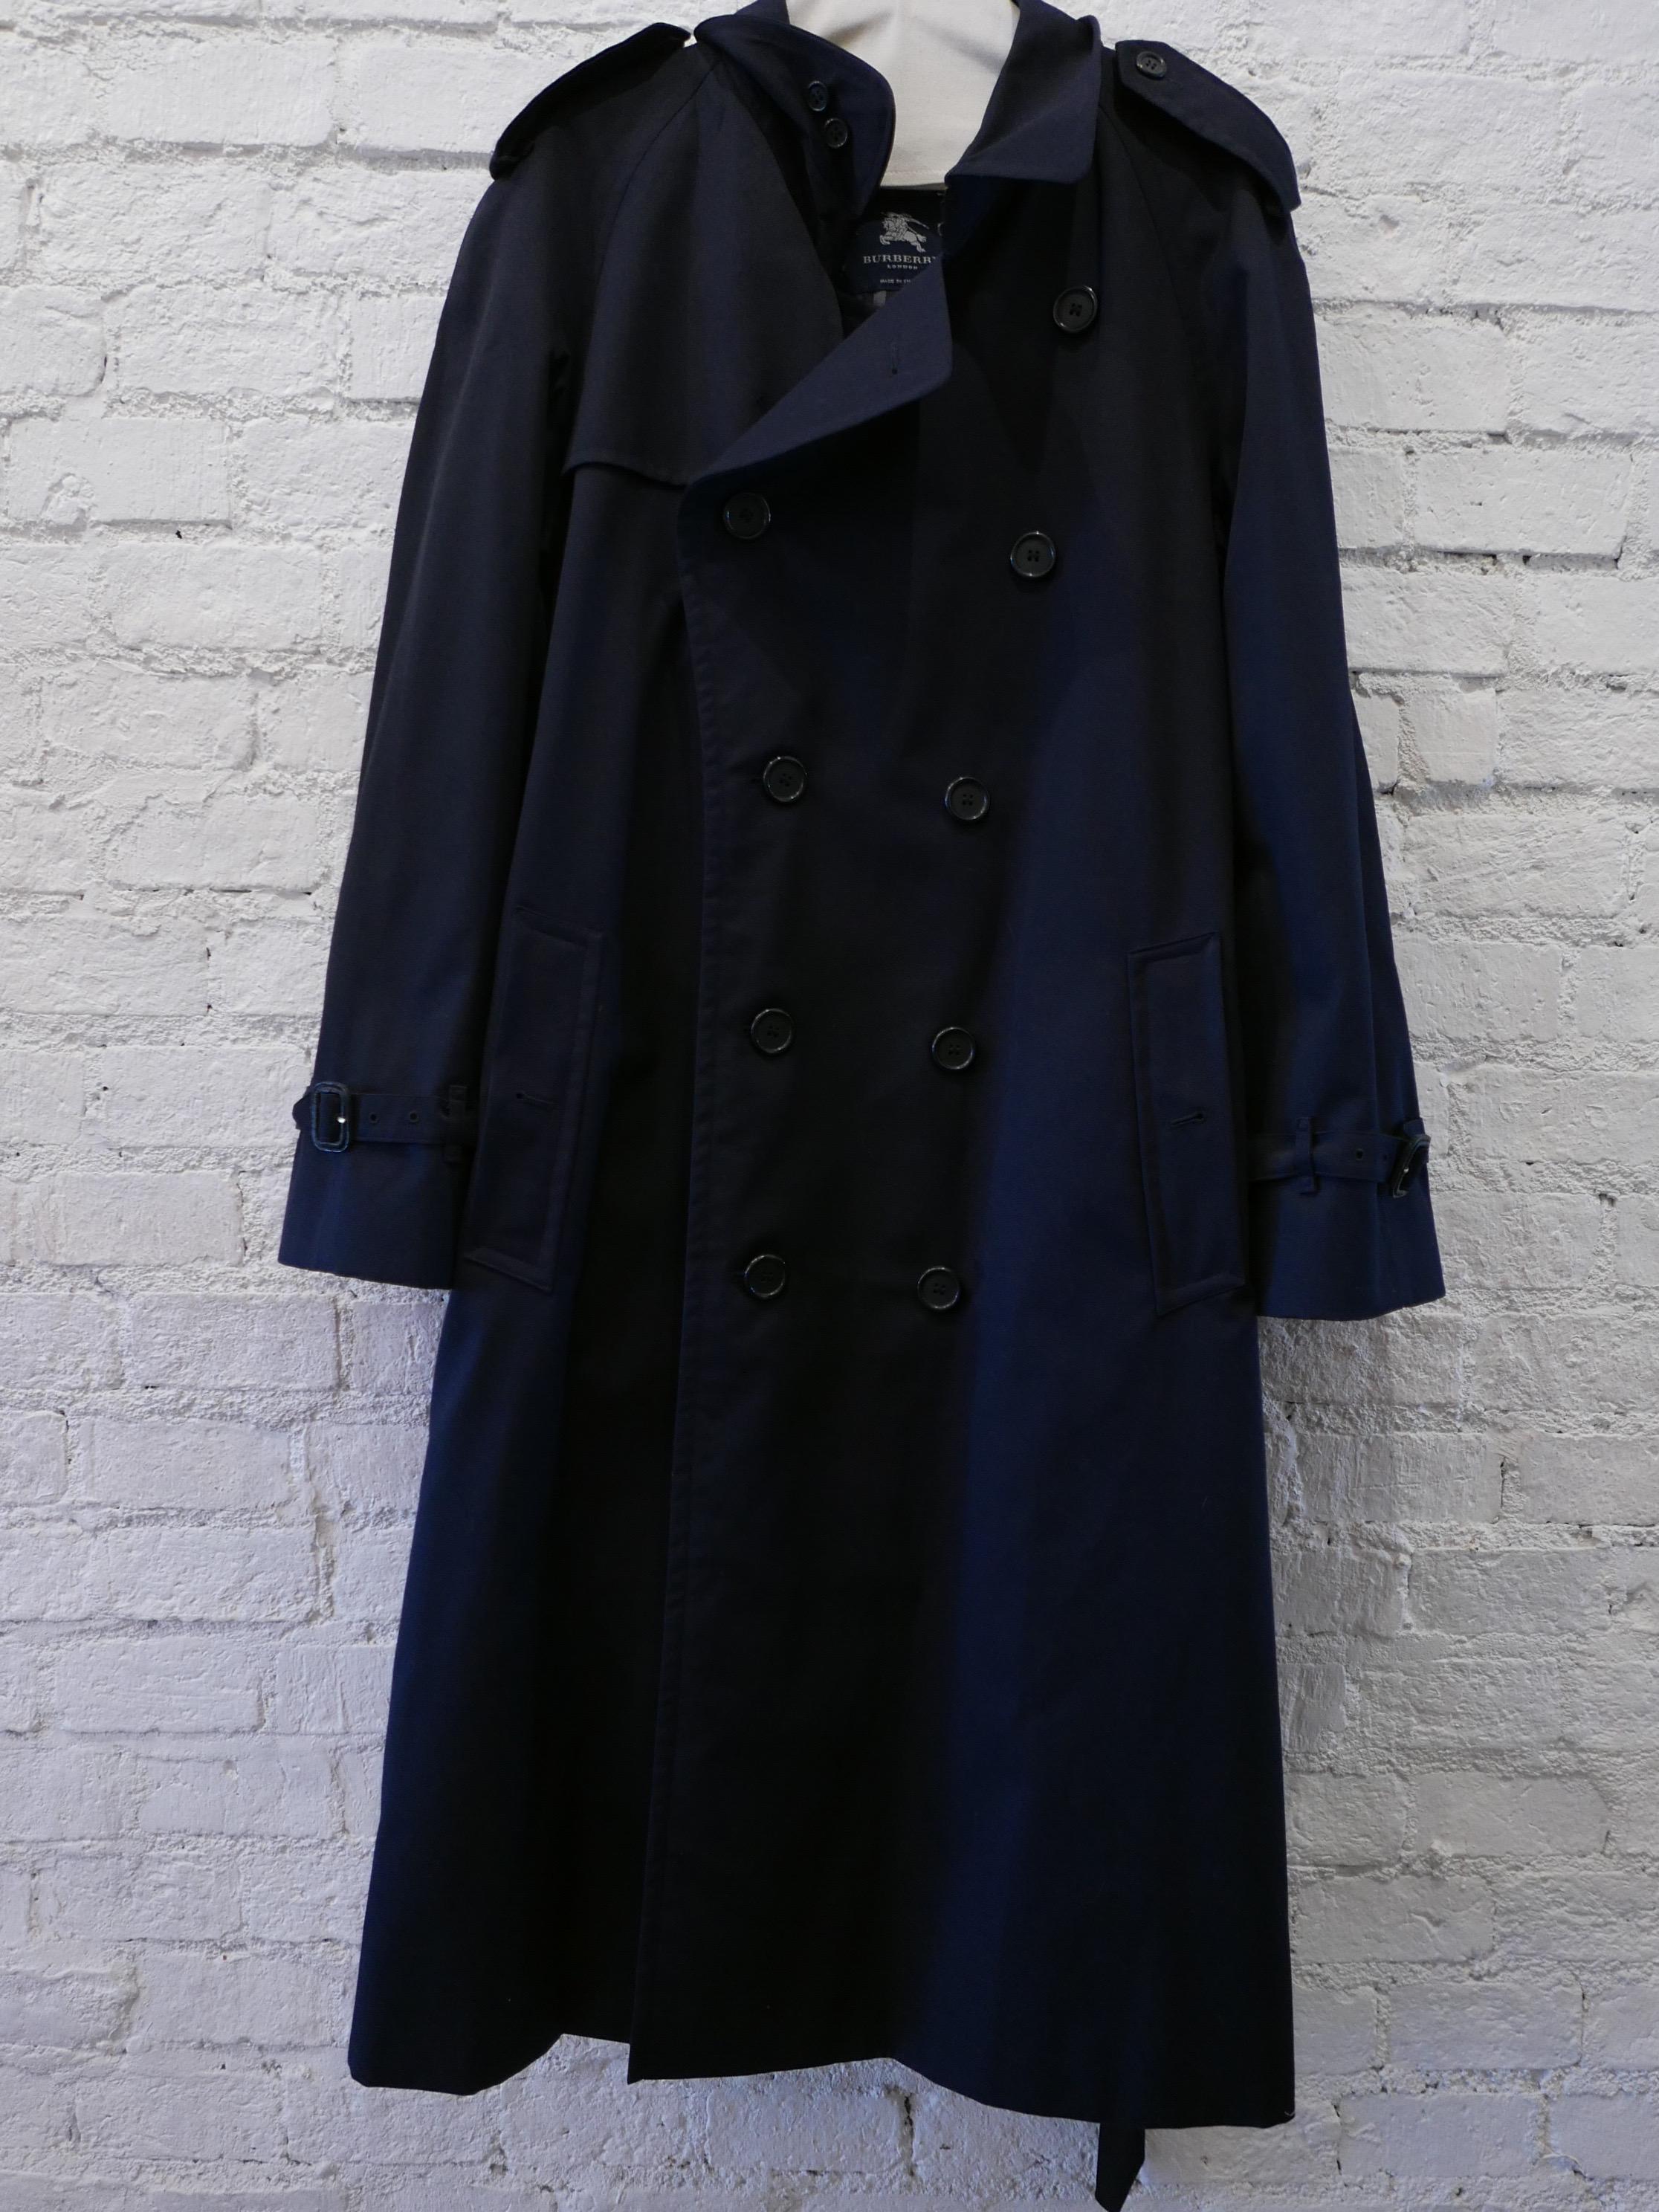 Burberry Men's Navy Trench Coat (New without Tag) 4